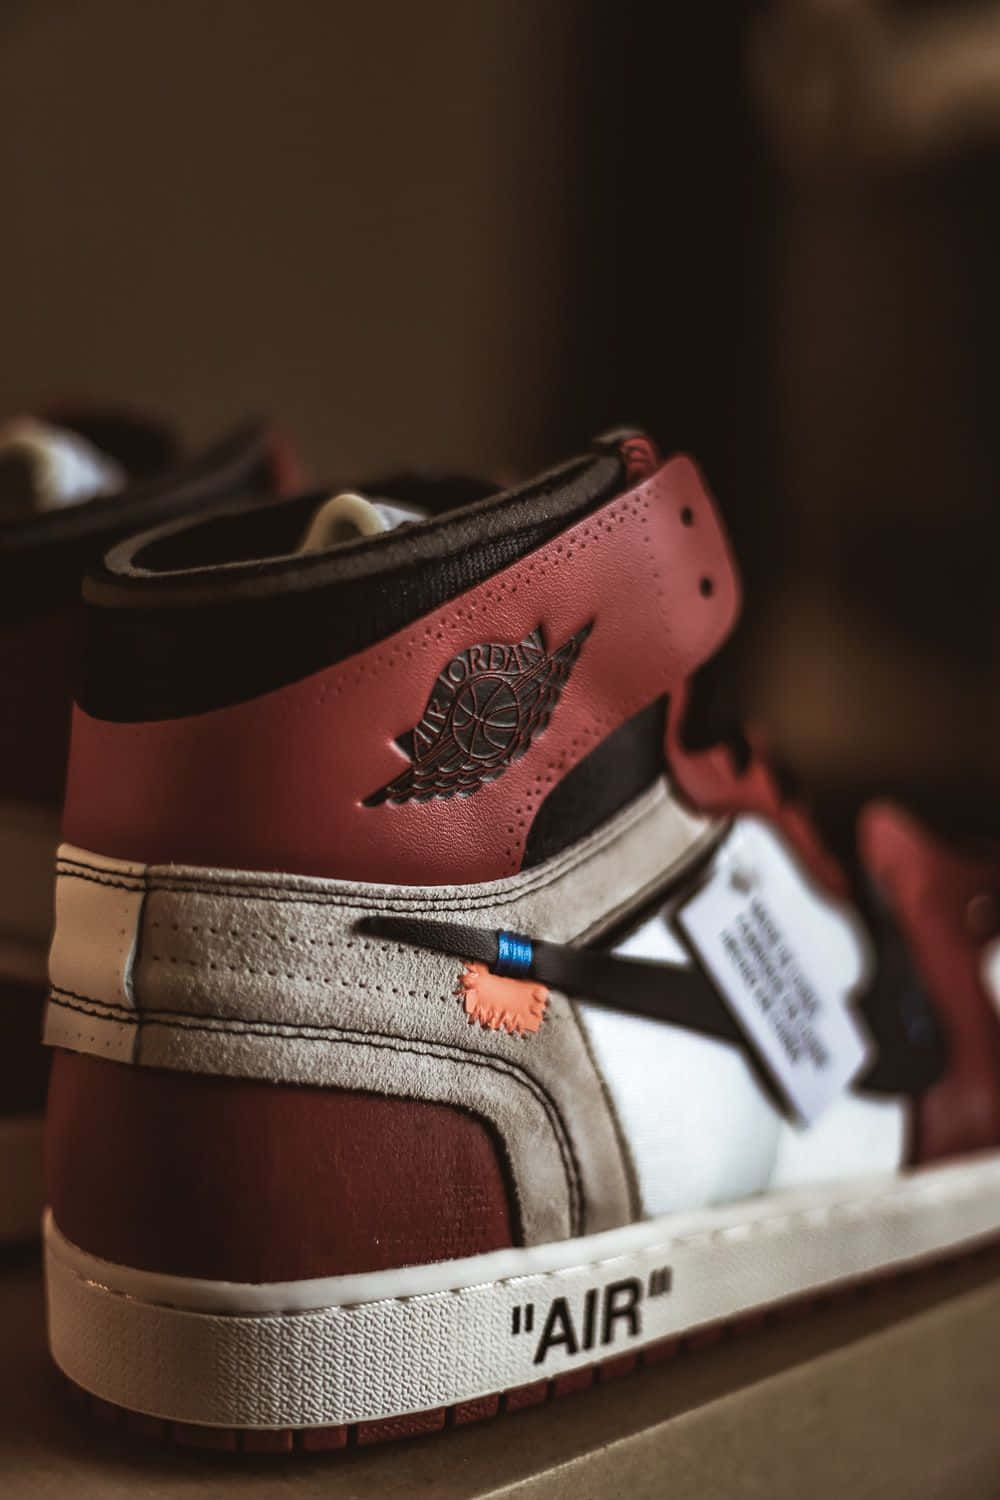 Fly High with the edgy Off White Jordan 1 Wallpaper